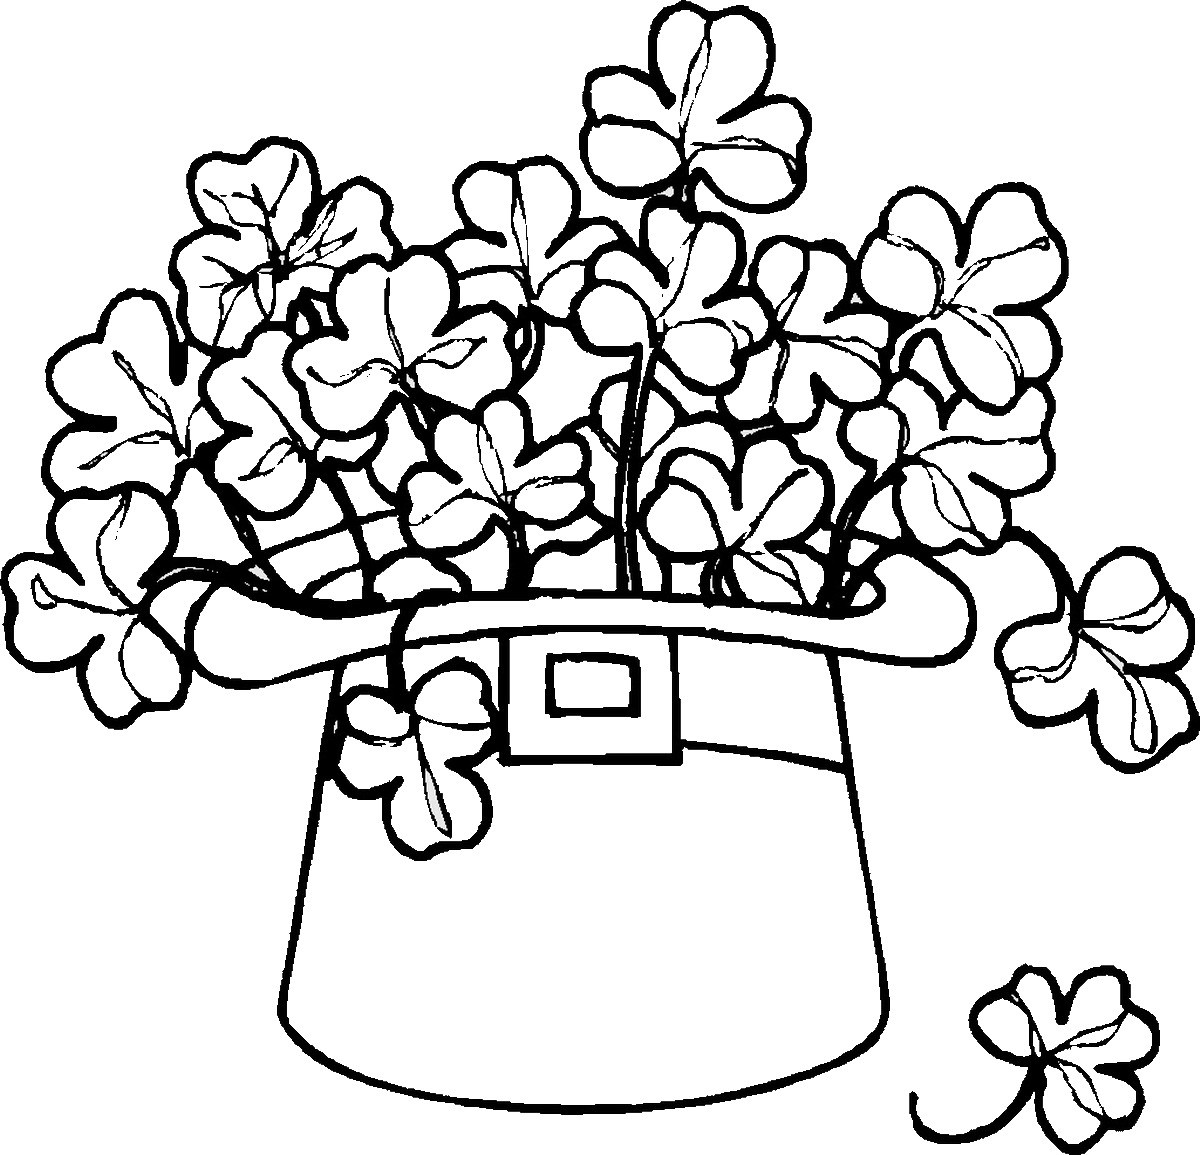 Free Printable Coloring Sheets On St. Patrick'S Day
 St Patrick s Day Coloring Pages for childrens printable